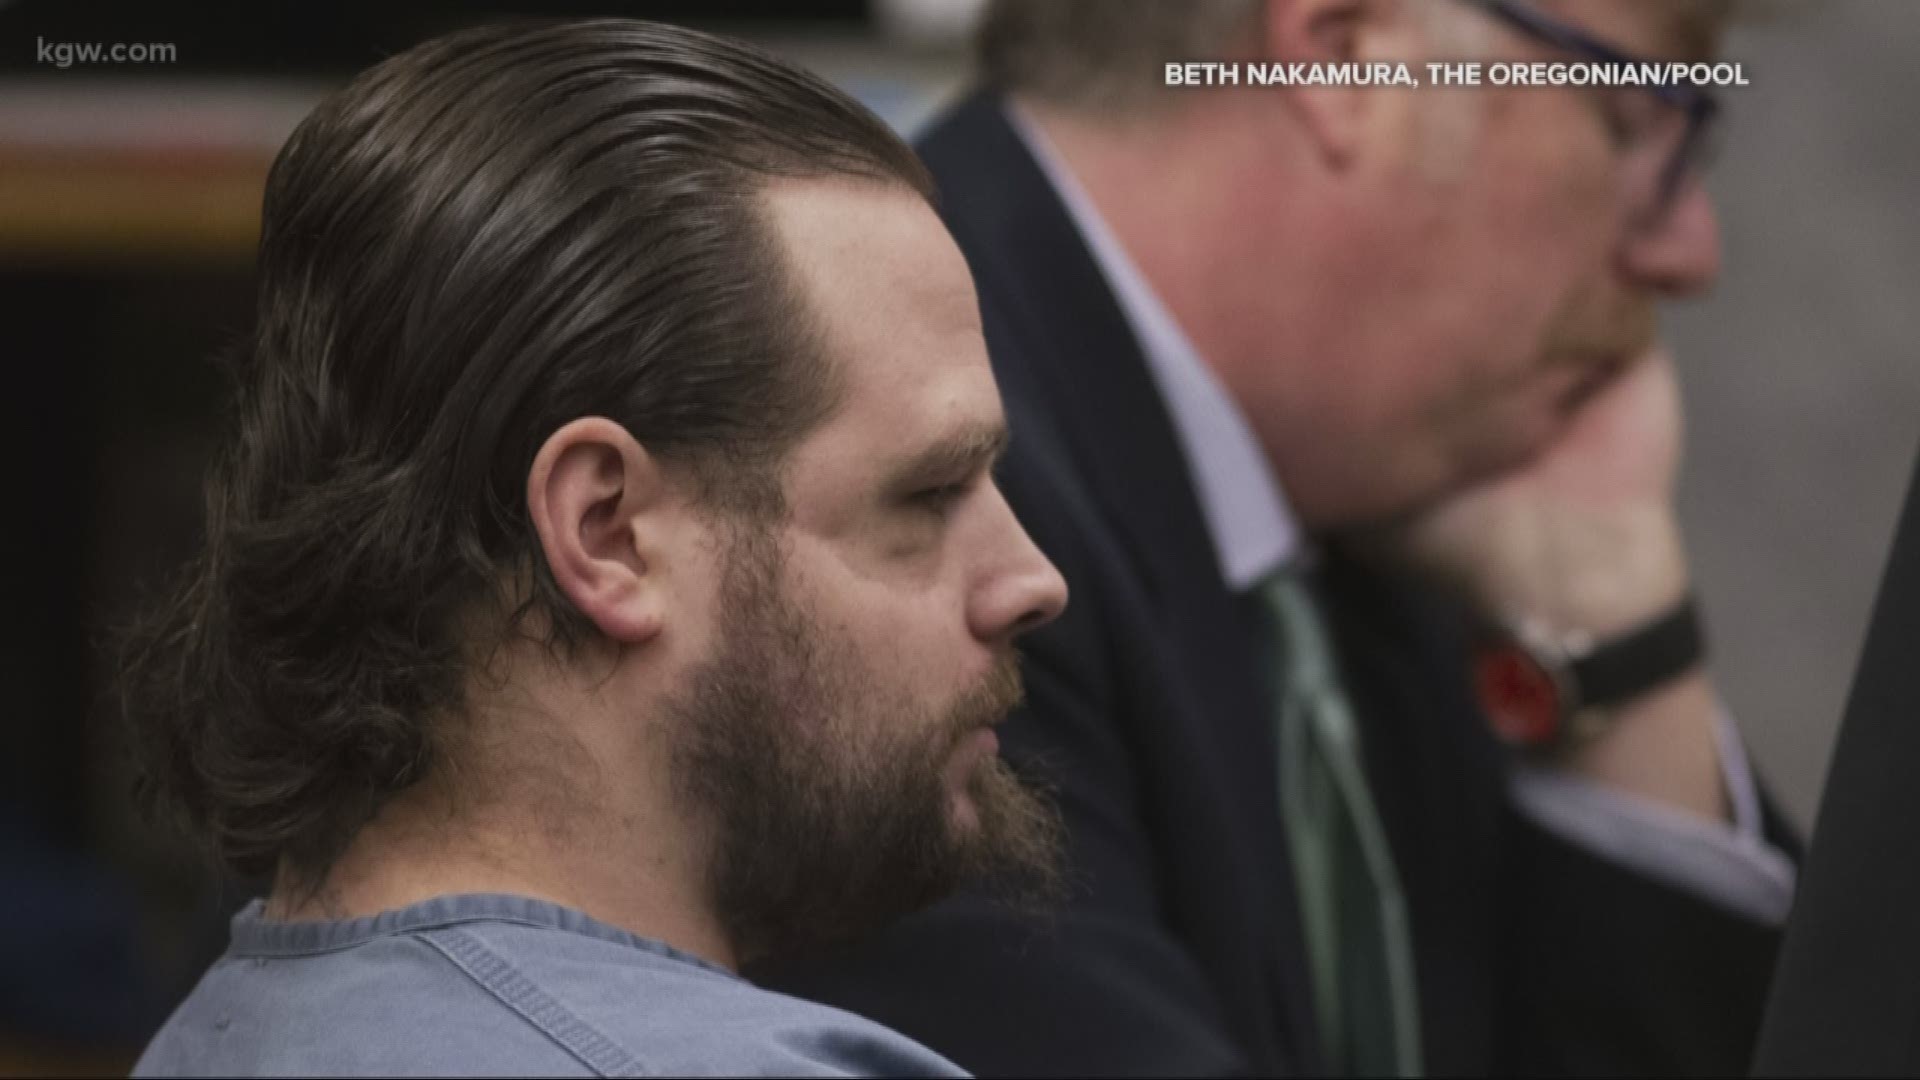 The prosecution's last witness examined Jeremy Christian and said he doesn't agree with the defense team's psychologist, who said Christian has autism.